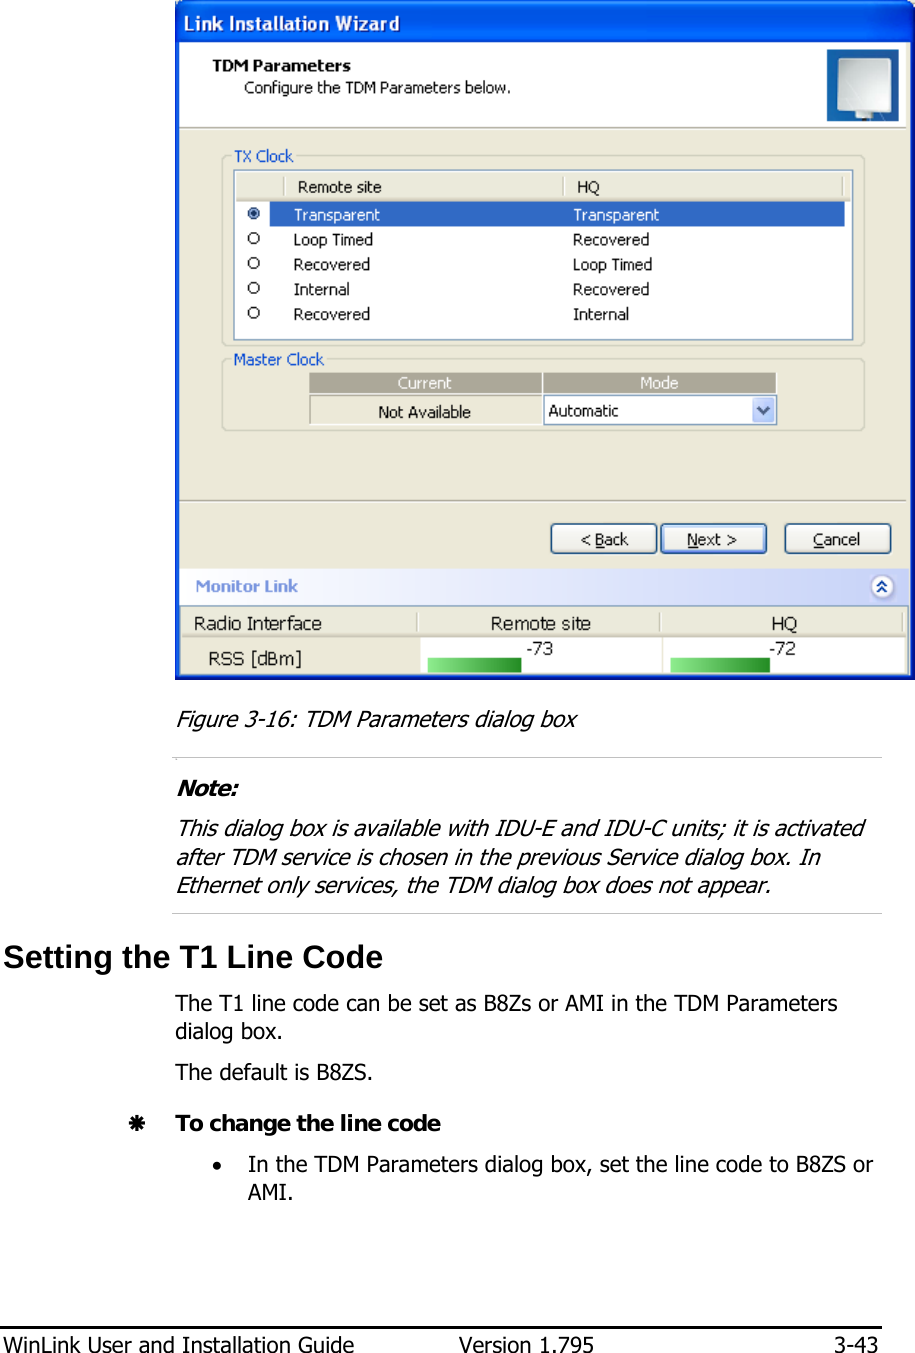  WinLink User and Installation Guide  Version 1.795  3-43   Figure  3-16: TDM Parameters dialog box 9.  Note: This dialog box is available with IDU-E and IDU-C units; it is activated after TDM service is chosen in the previous Service dialog box. In Ethernet only services, the TDM dialog box does not appear.  Setting the T1 Line Code The T1 line code can be set as B8Zs or AMI in the TDM Parameters dialog box. The default is B8ZS. Æ To change the line code • In the TDM Parameters dialog box, set the line code to B8ZS or AMI. 